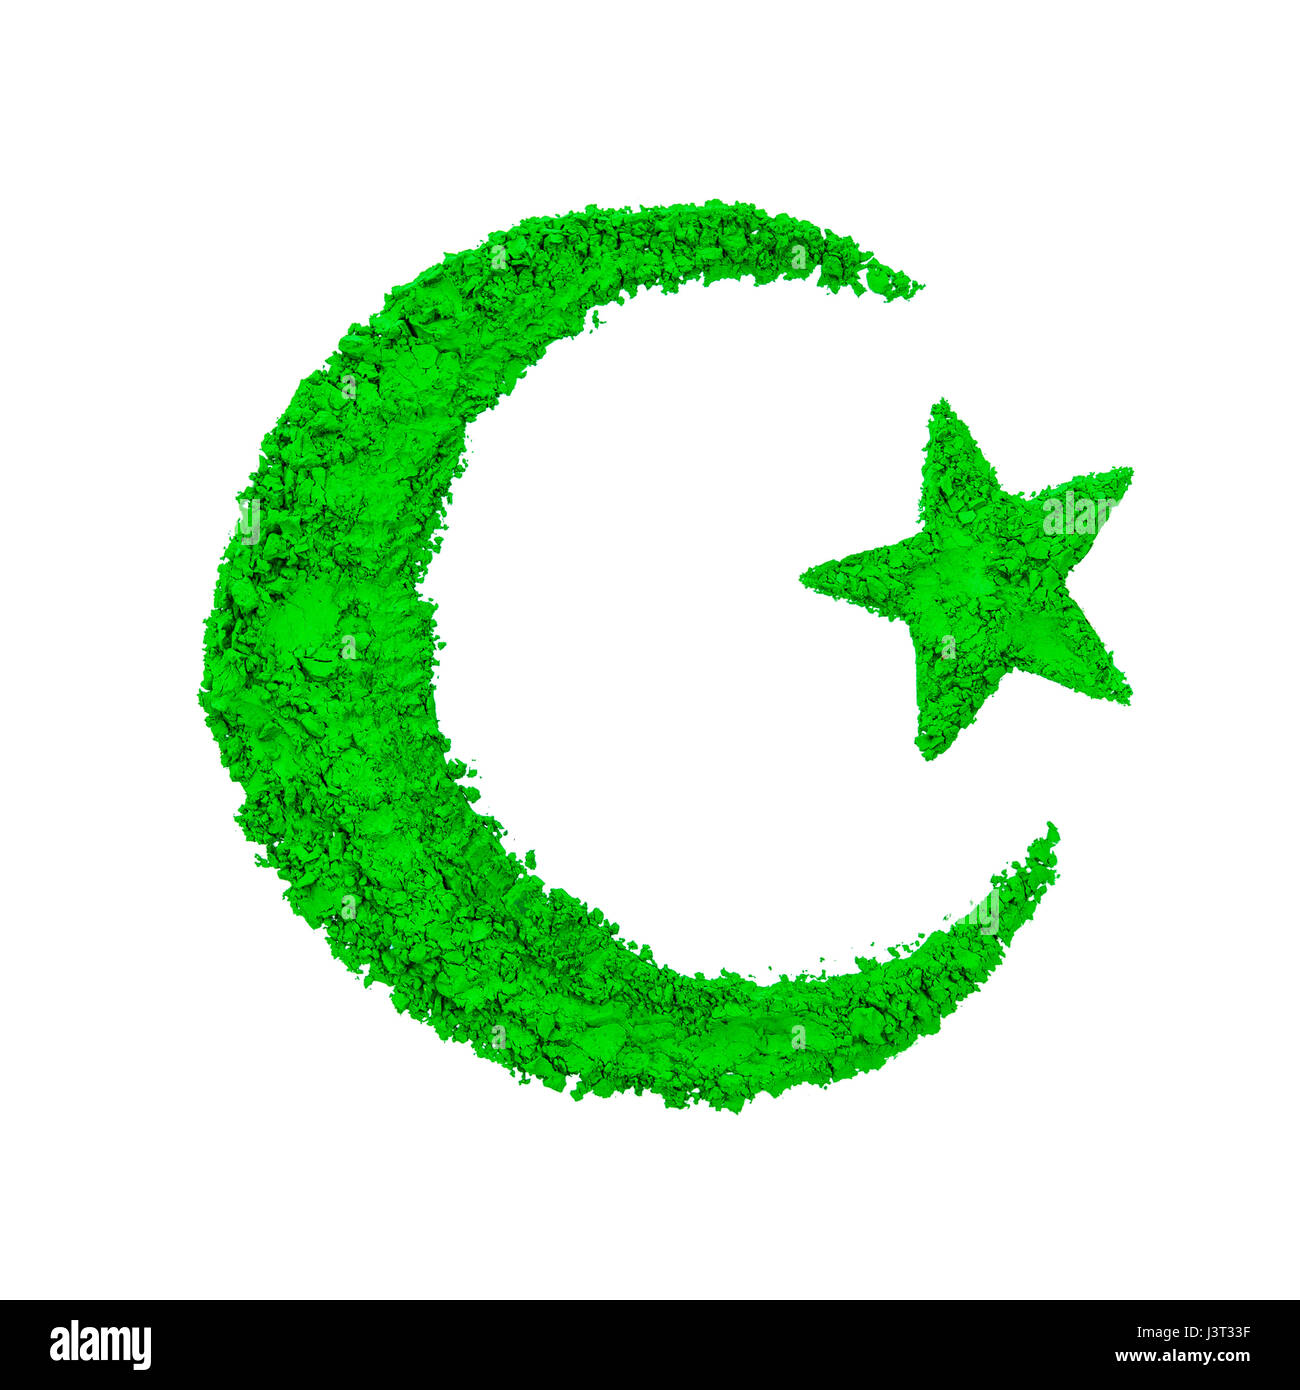 Crescent Moon and Star of Islam made with green color powder, isolated on a white background Stock Photo